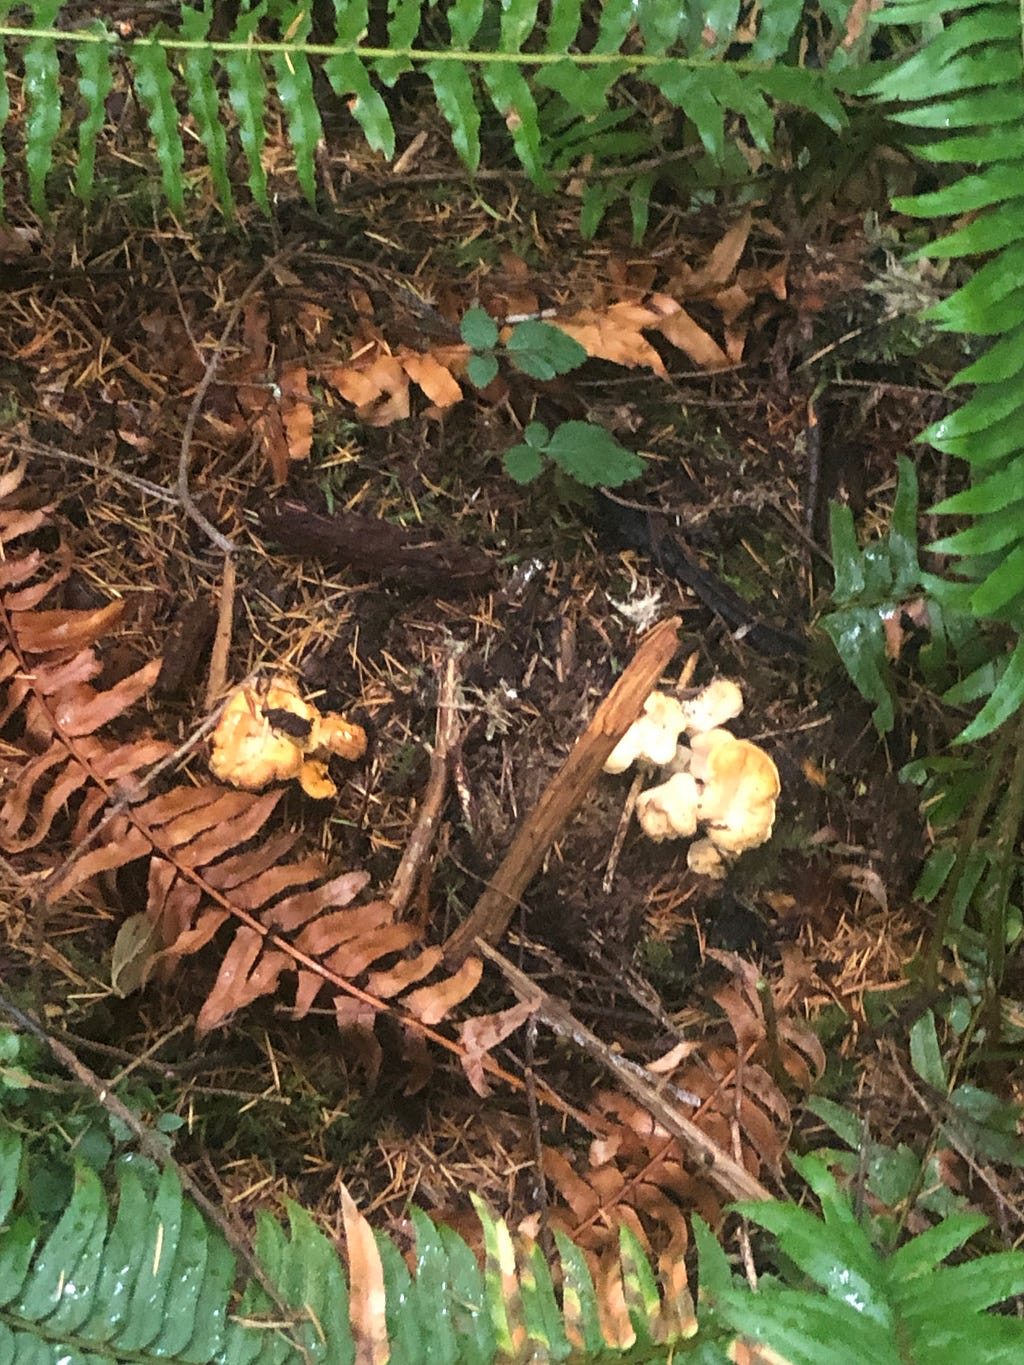 Forest floor with some branches, ferns, and chanterelle mushrooms.